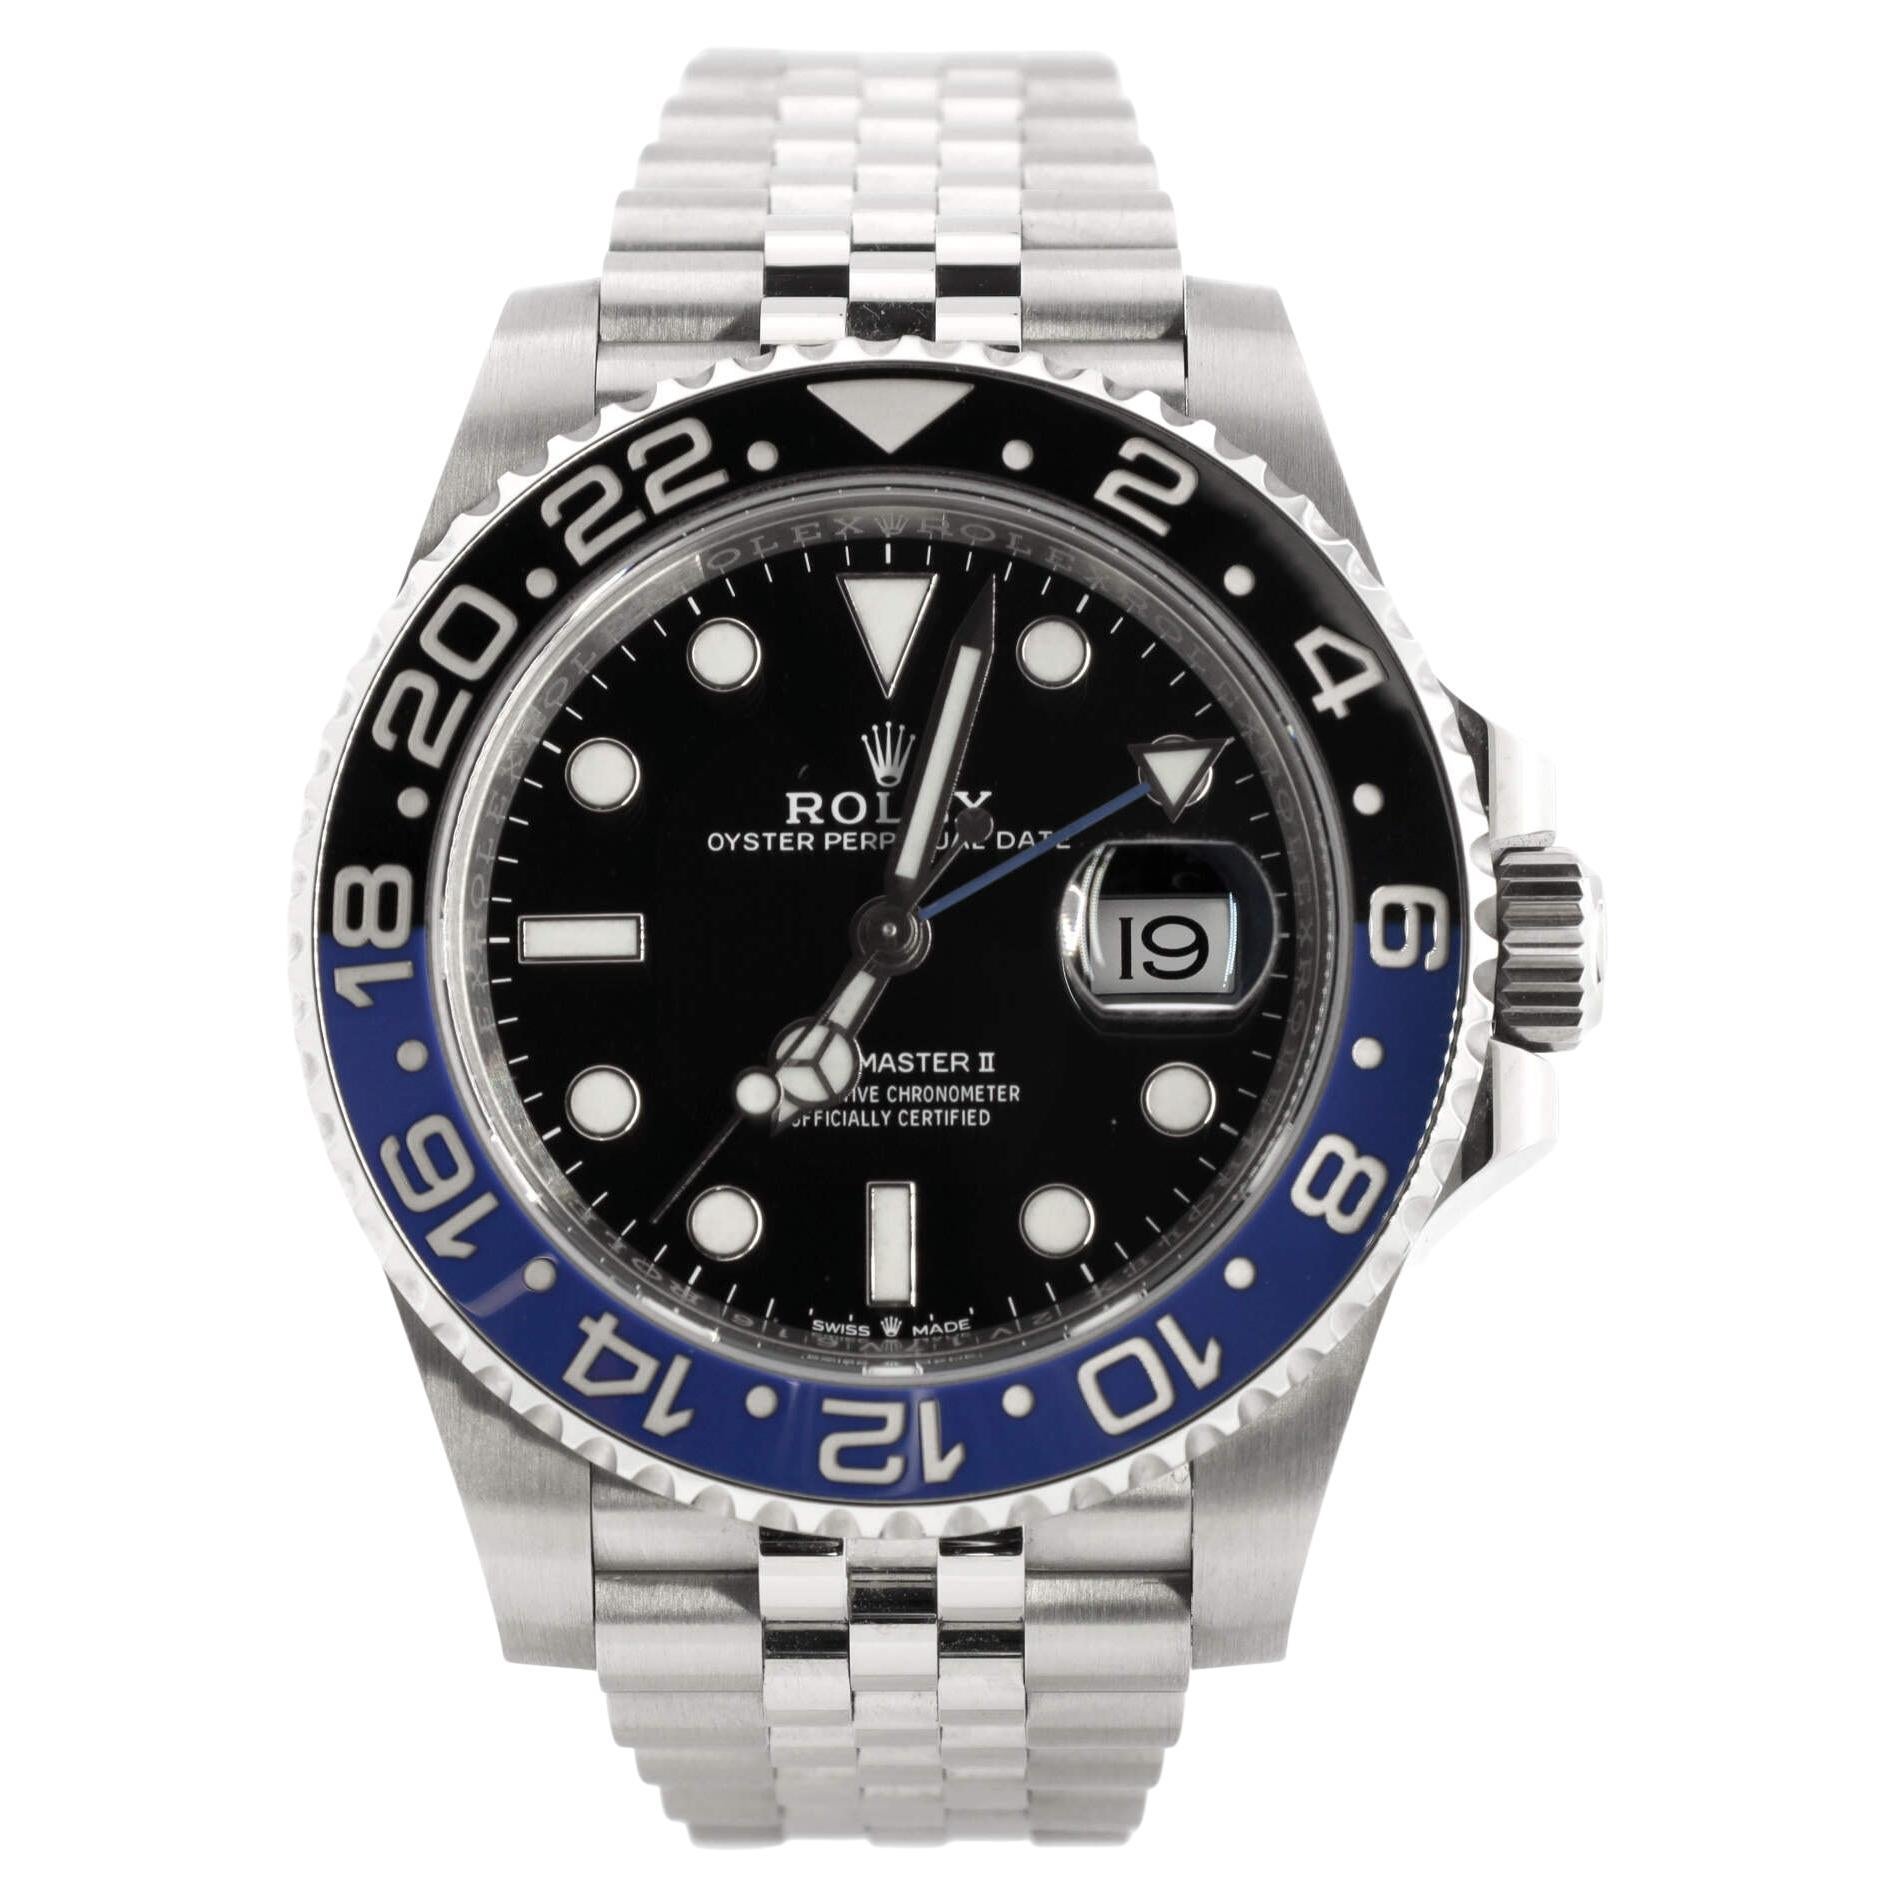 Rolex Oyster Perpetual Date GMT-Master II Batgirl Automatic Watch Stainless